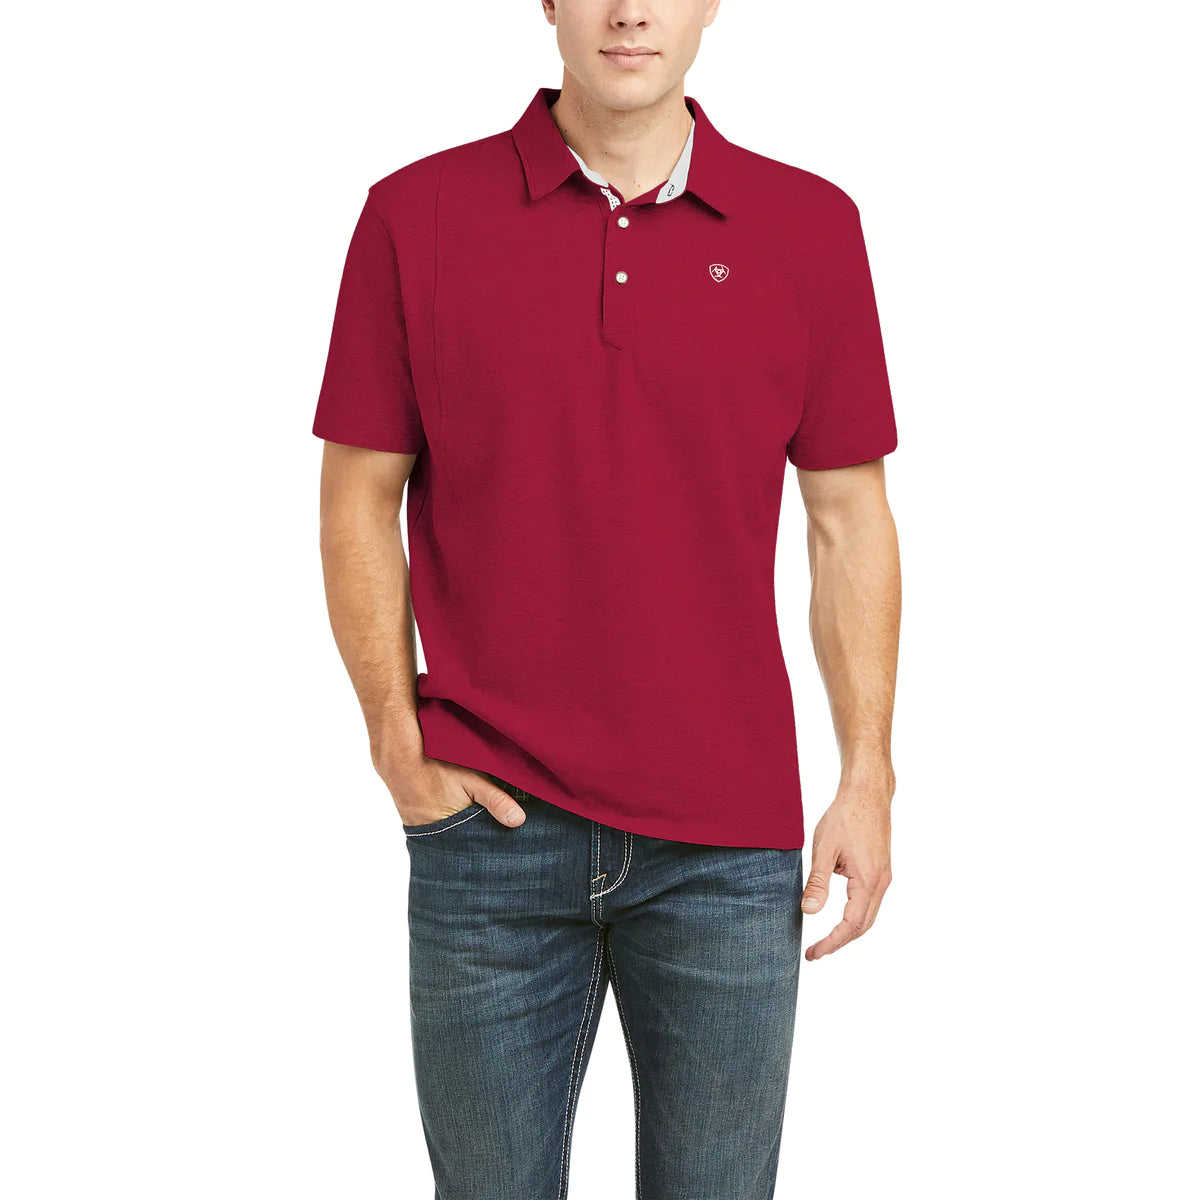 Ariat Men's Medal Polo Red